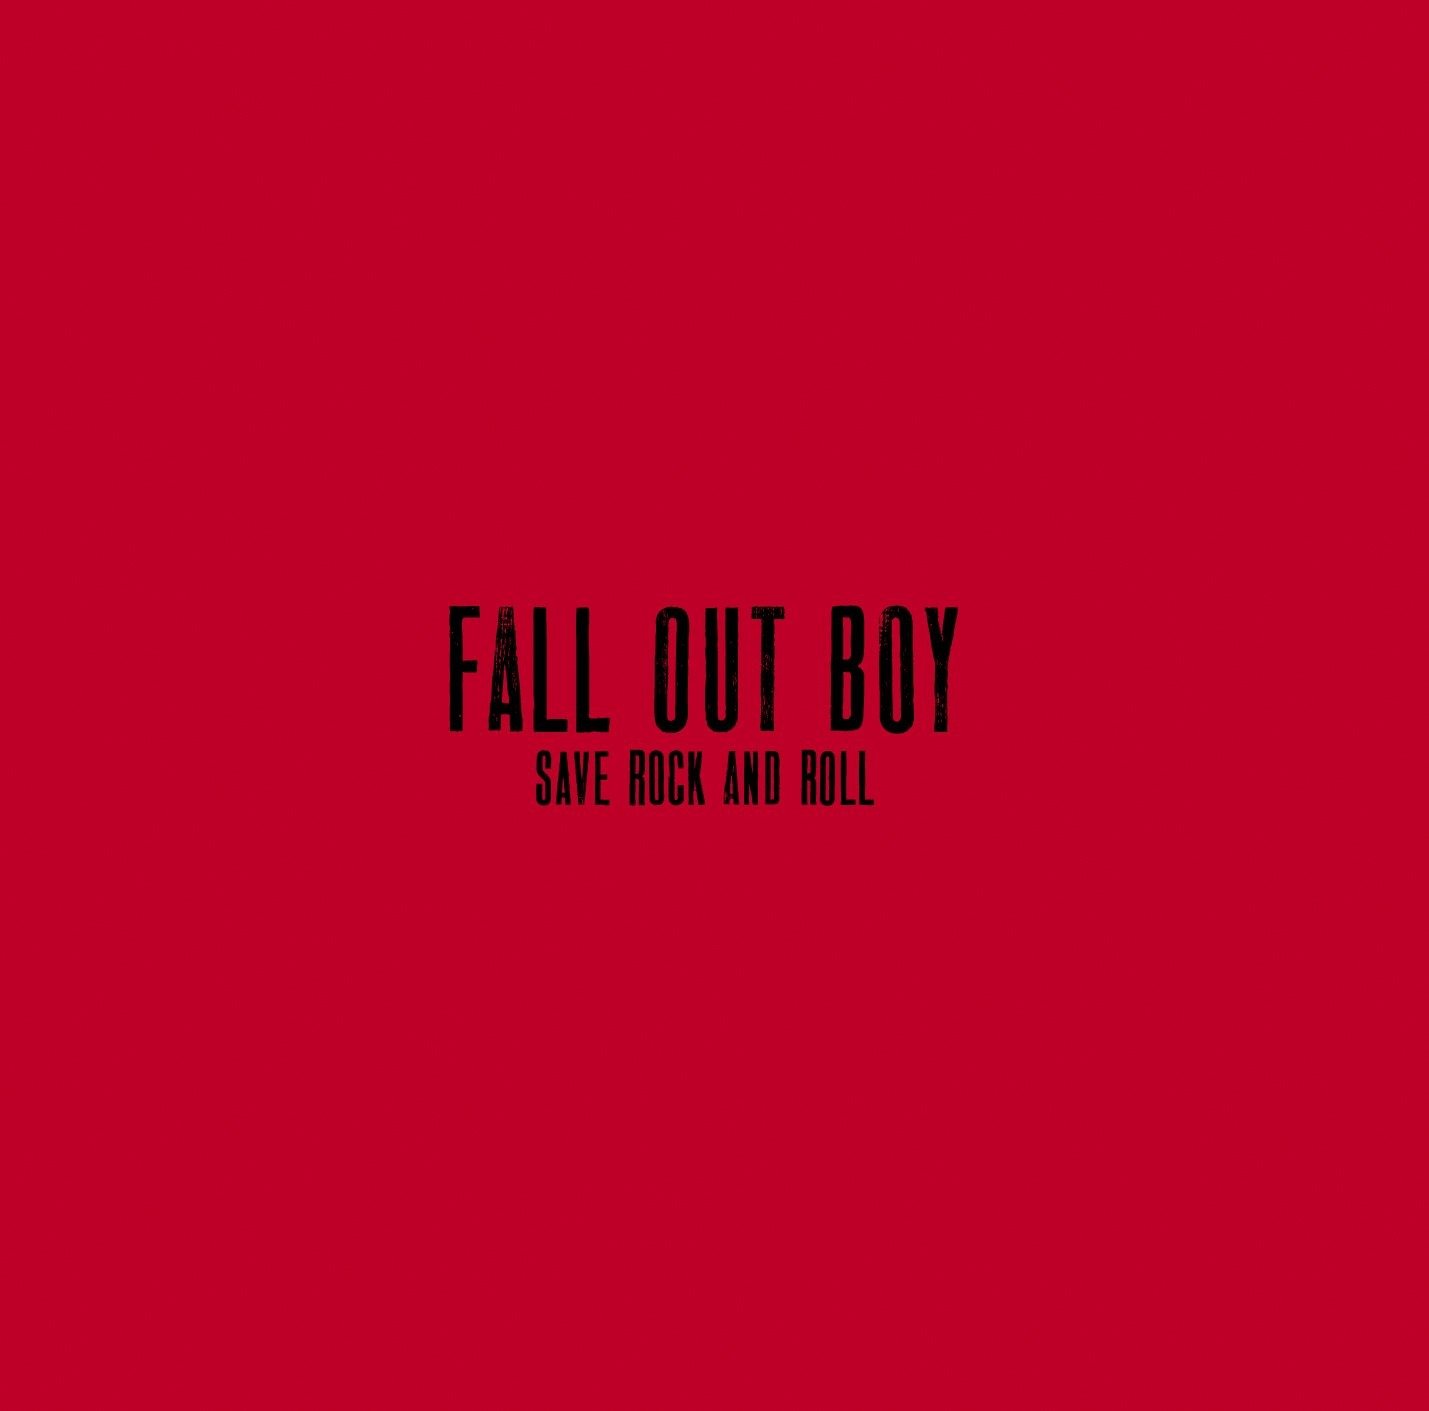 CD Shop - FALL OUT BOY SAVE ROCK AND ROLL